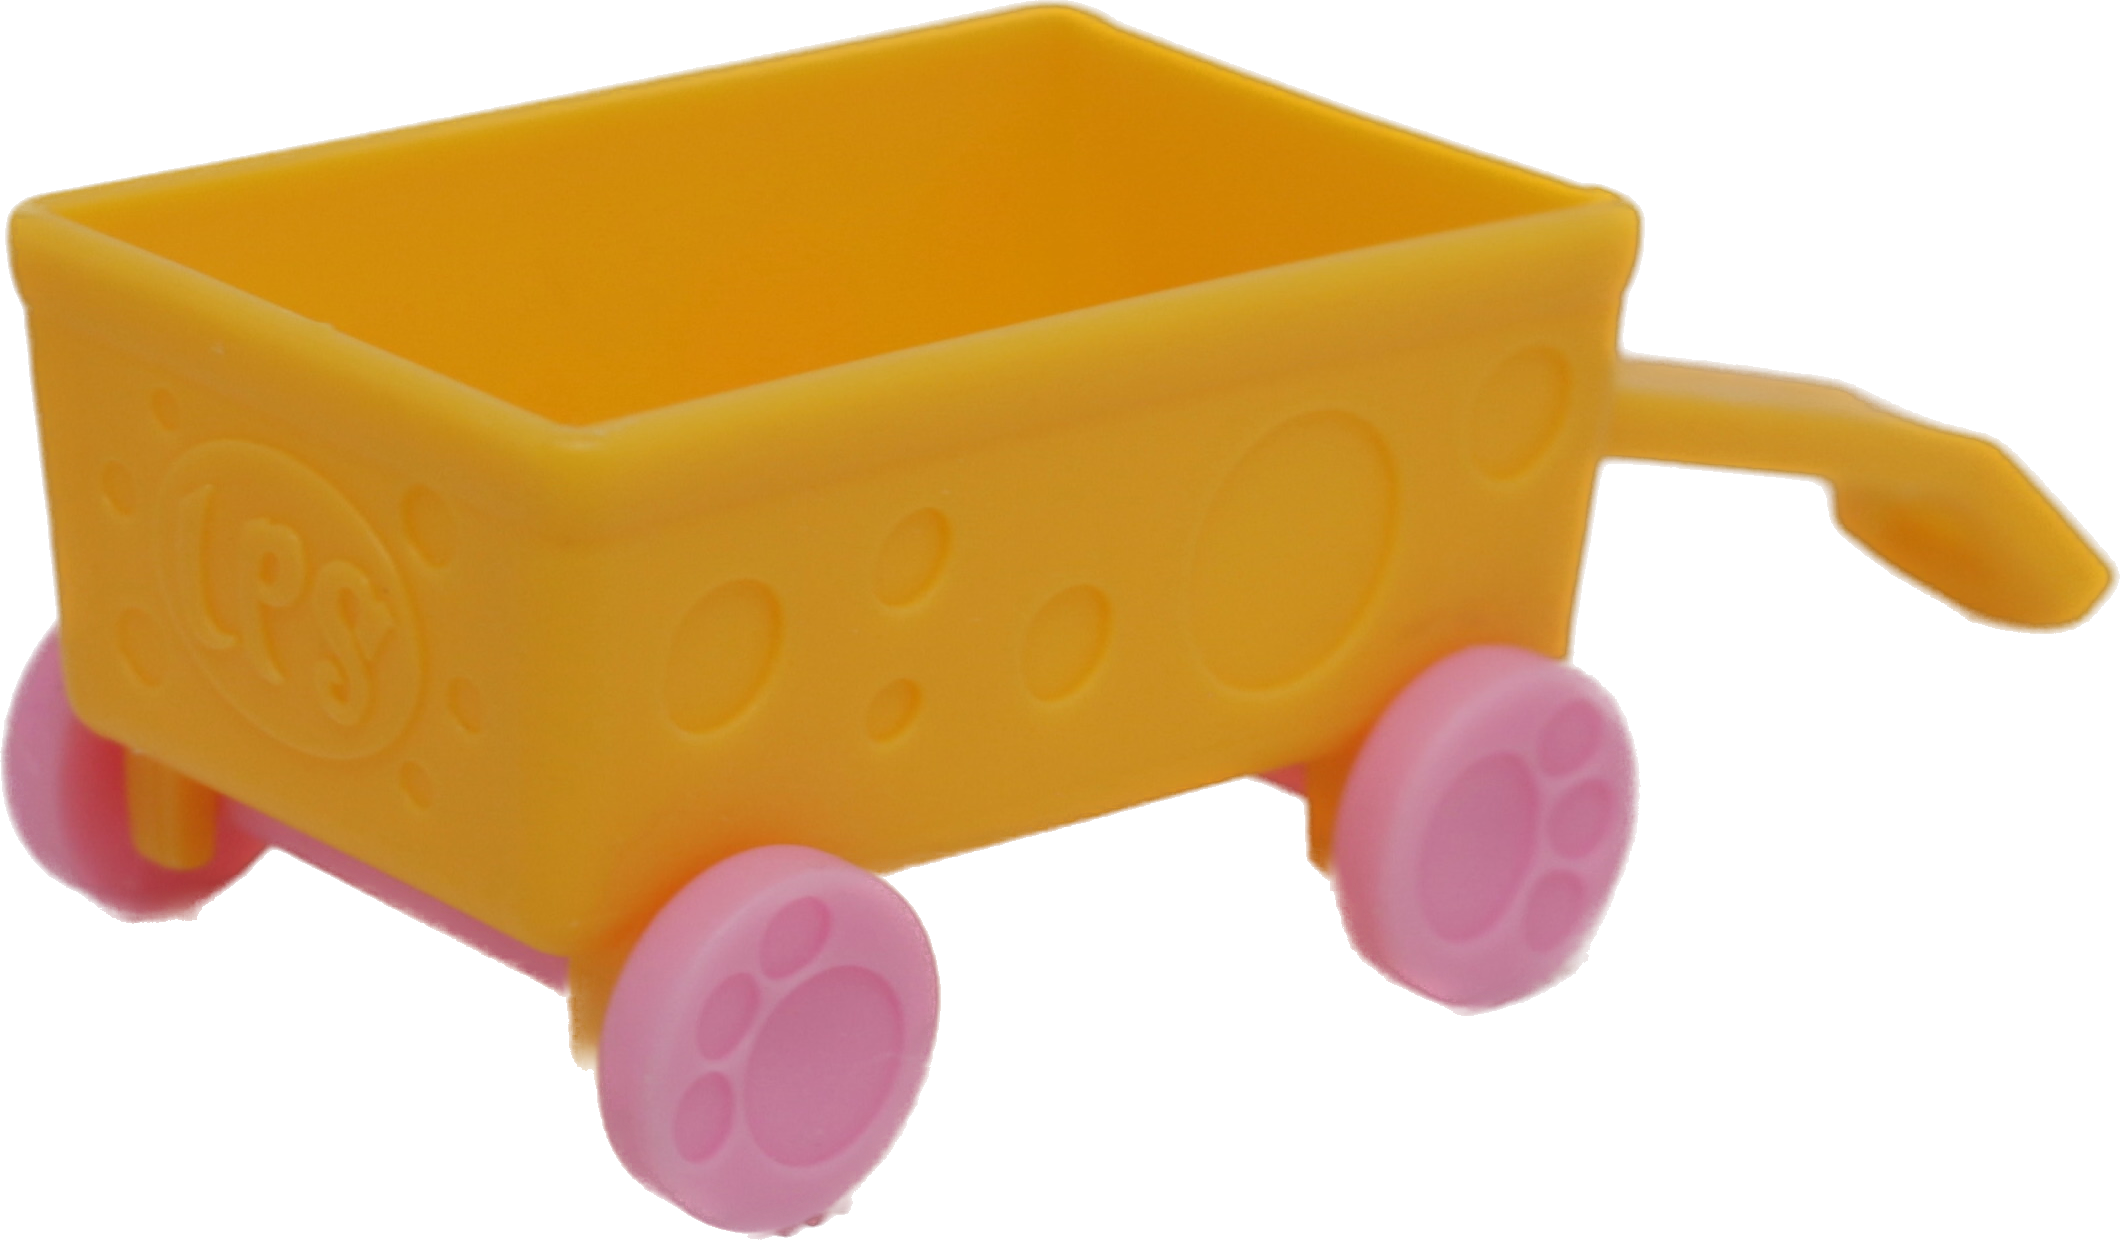 THE CHEESE WAGON.